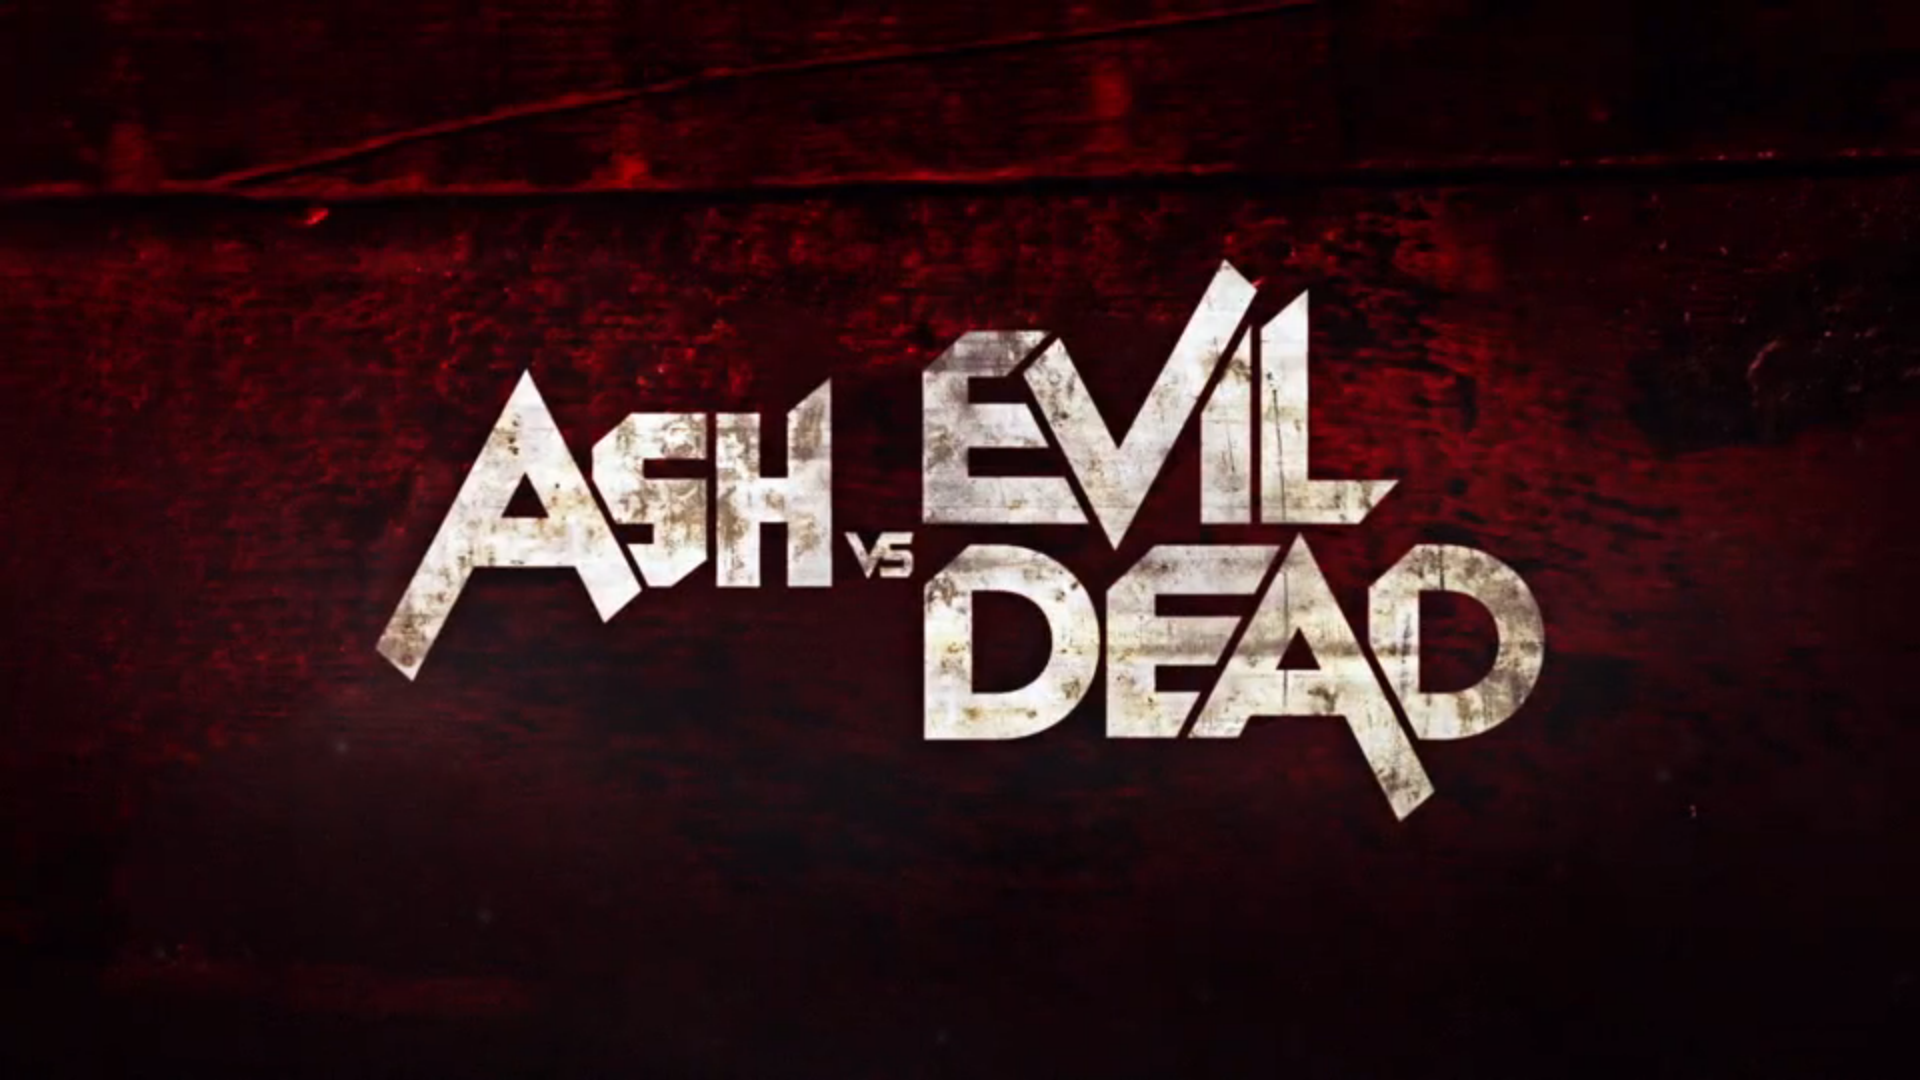 Ash vs. Evil Dead Wallpapers High Resolution and Quality Download